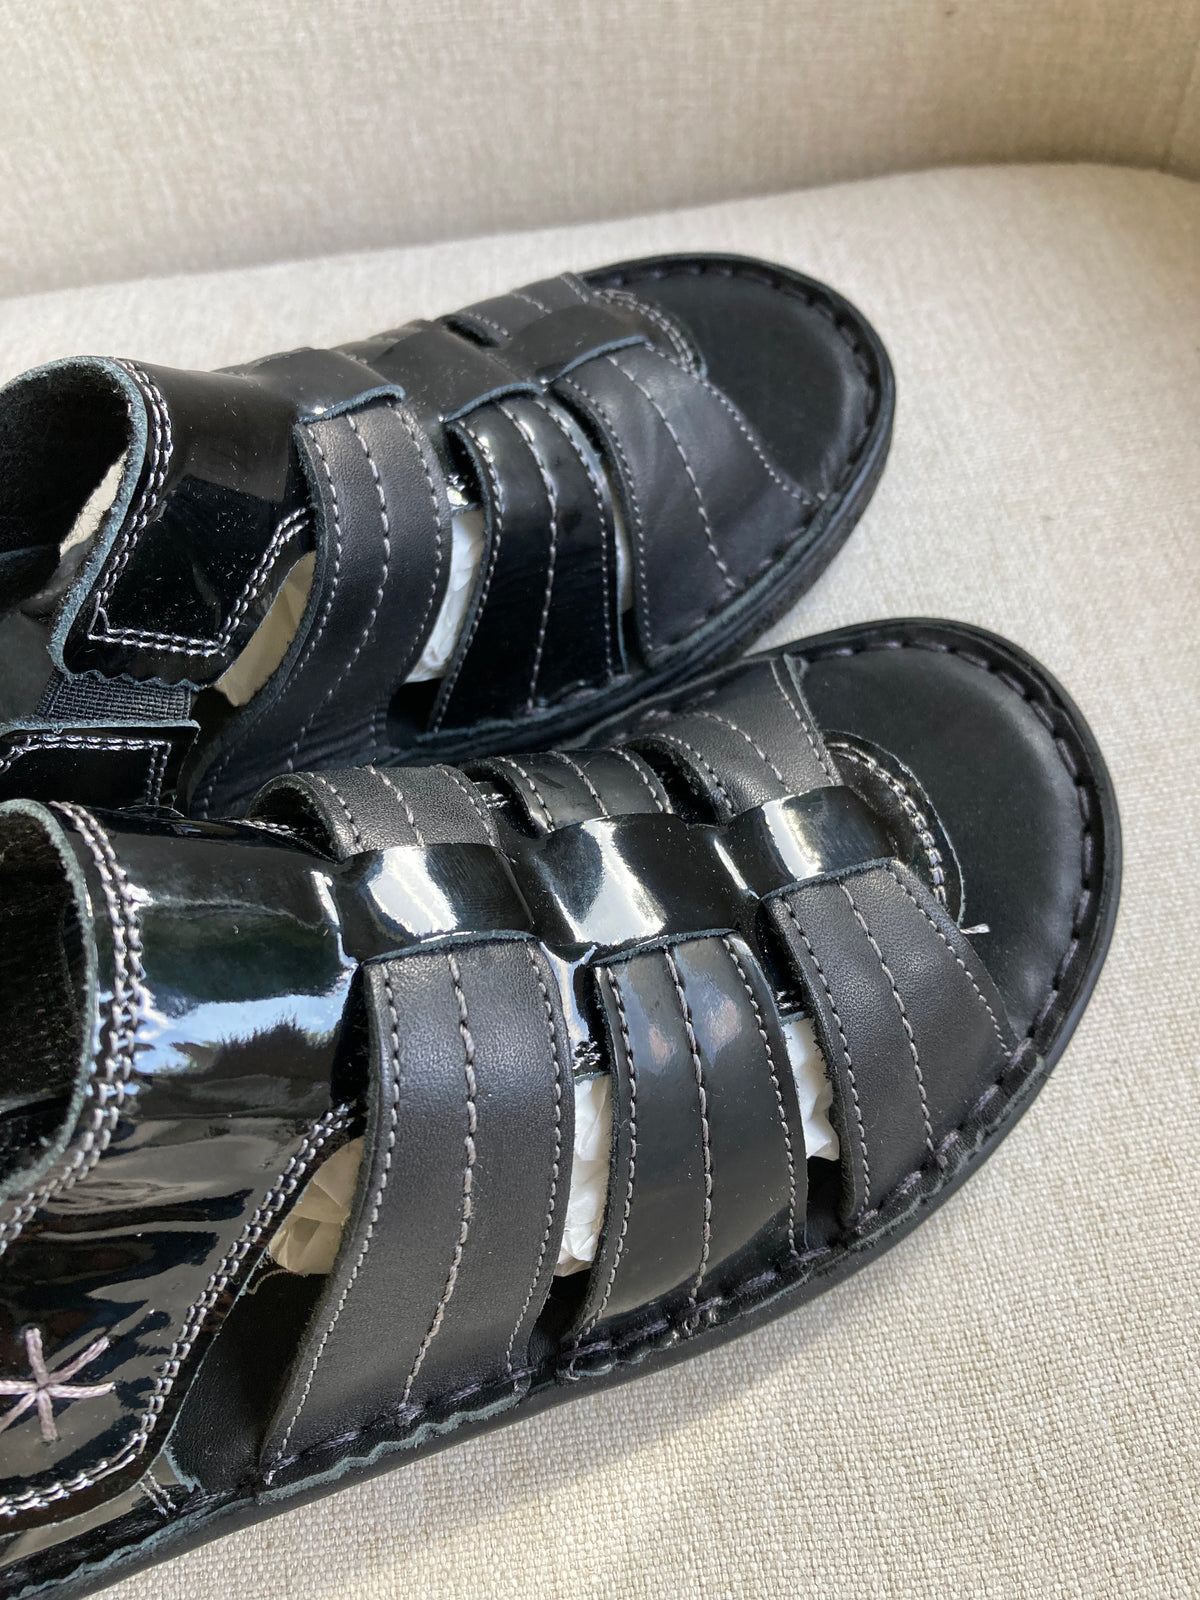 Black leather comfort sandals by Airsoft size 6